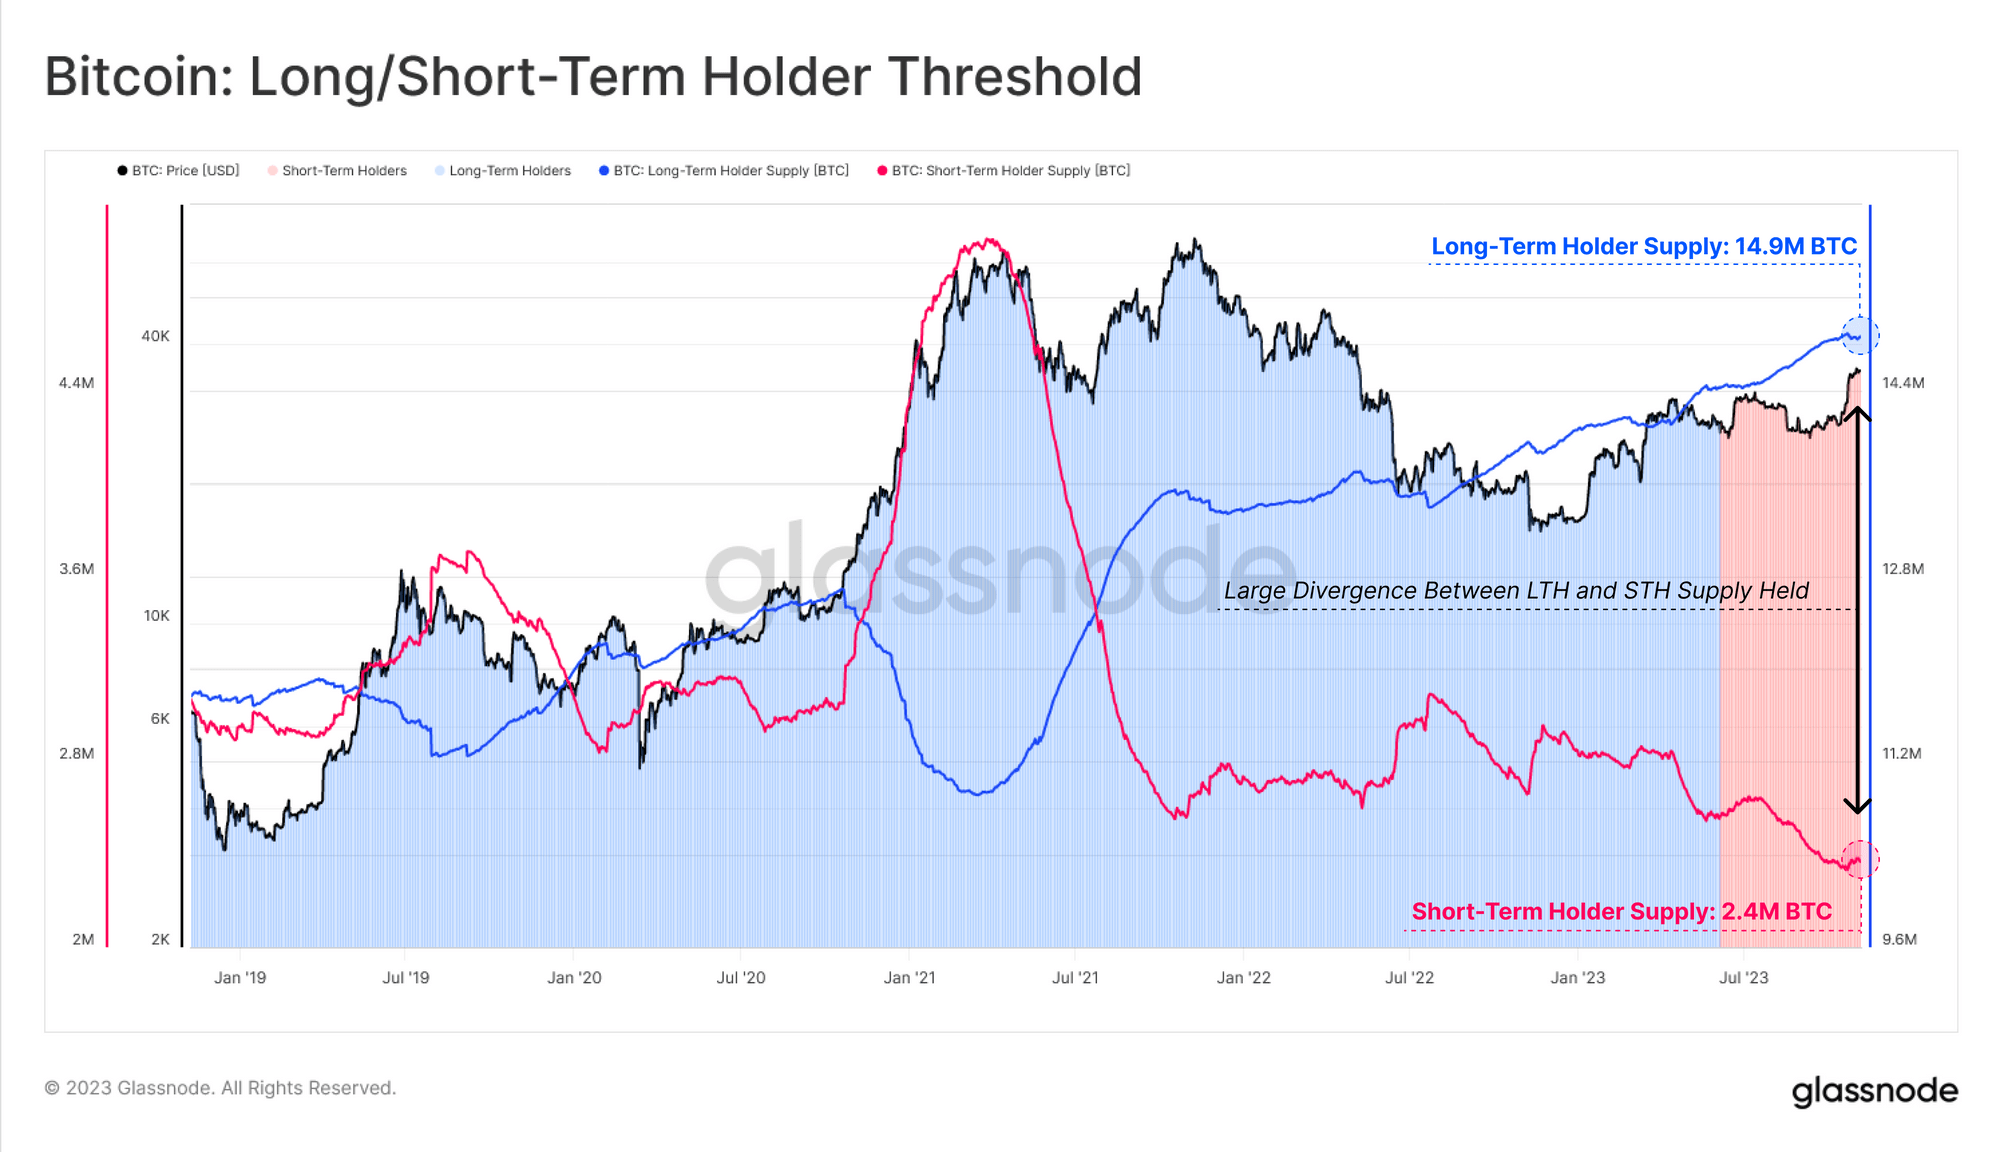 Divergence between Bitcoin's long-term and short-term holders.